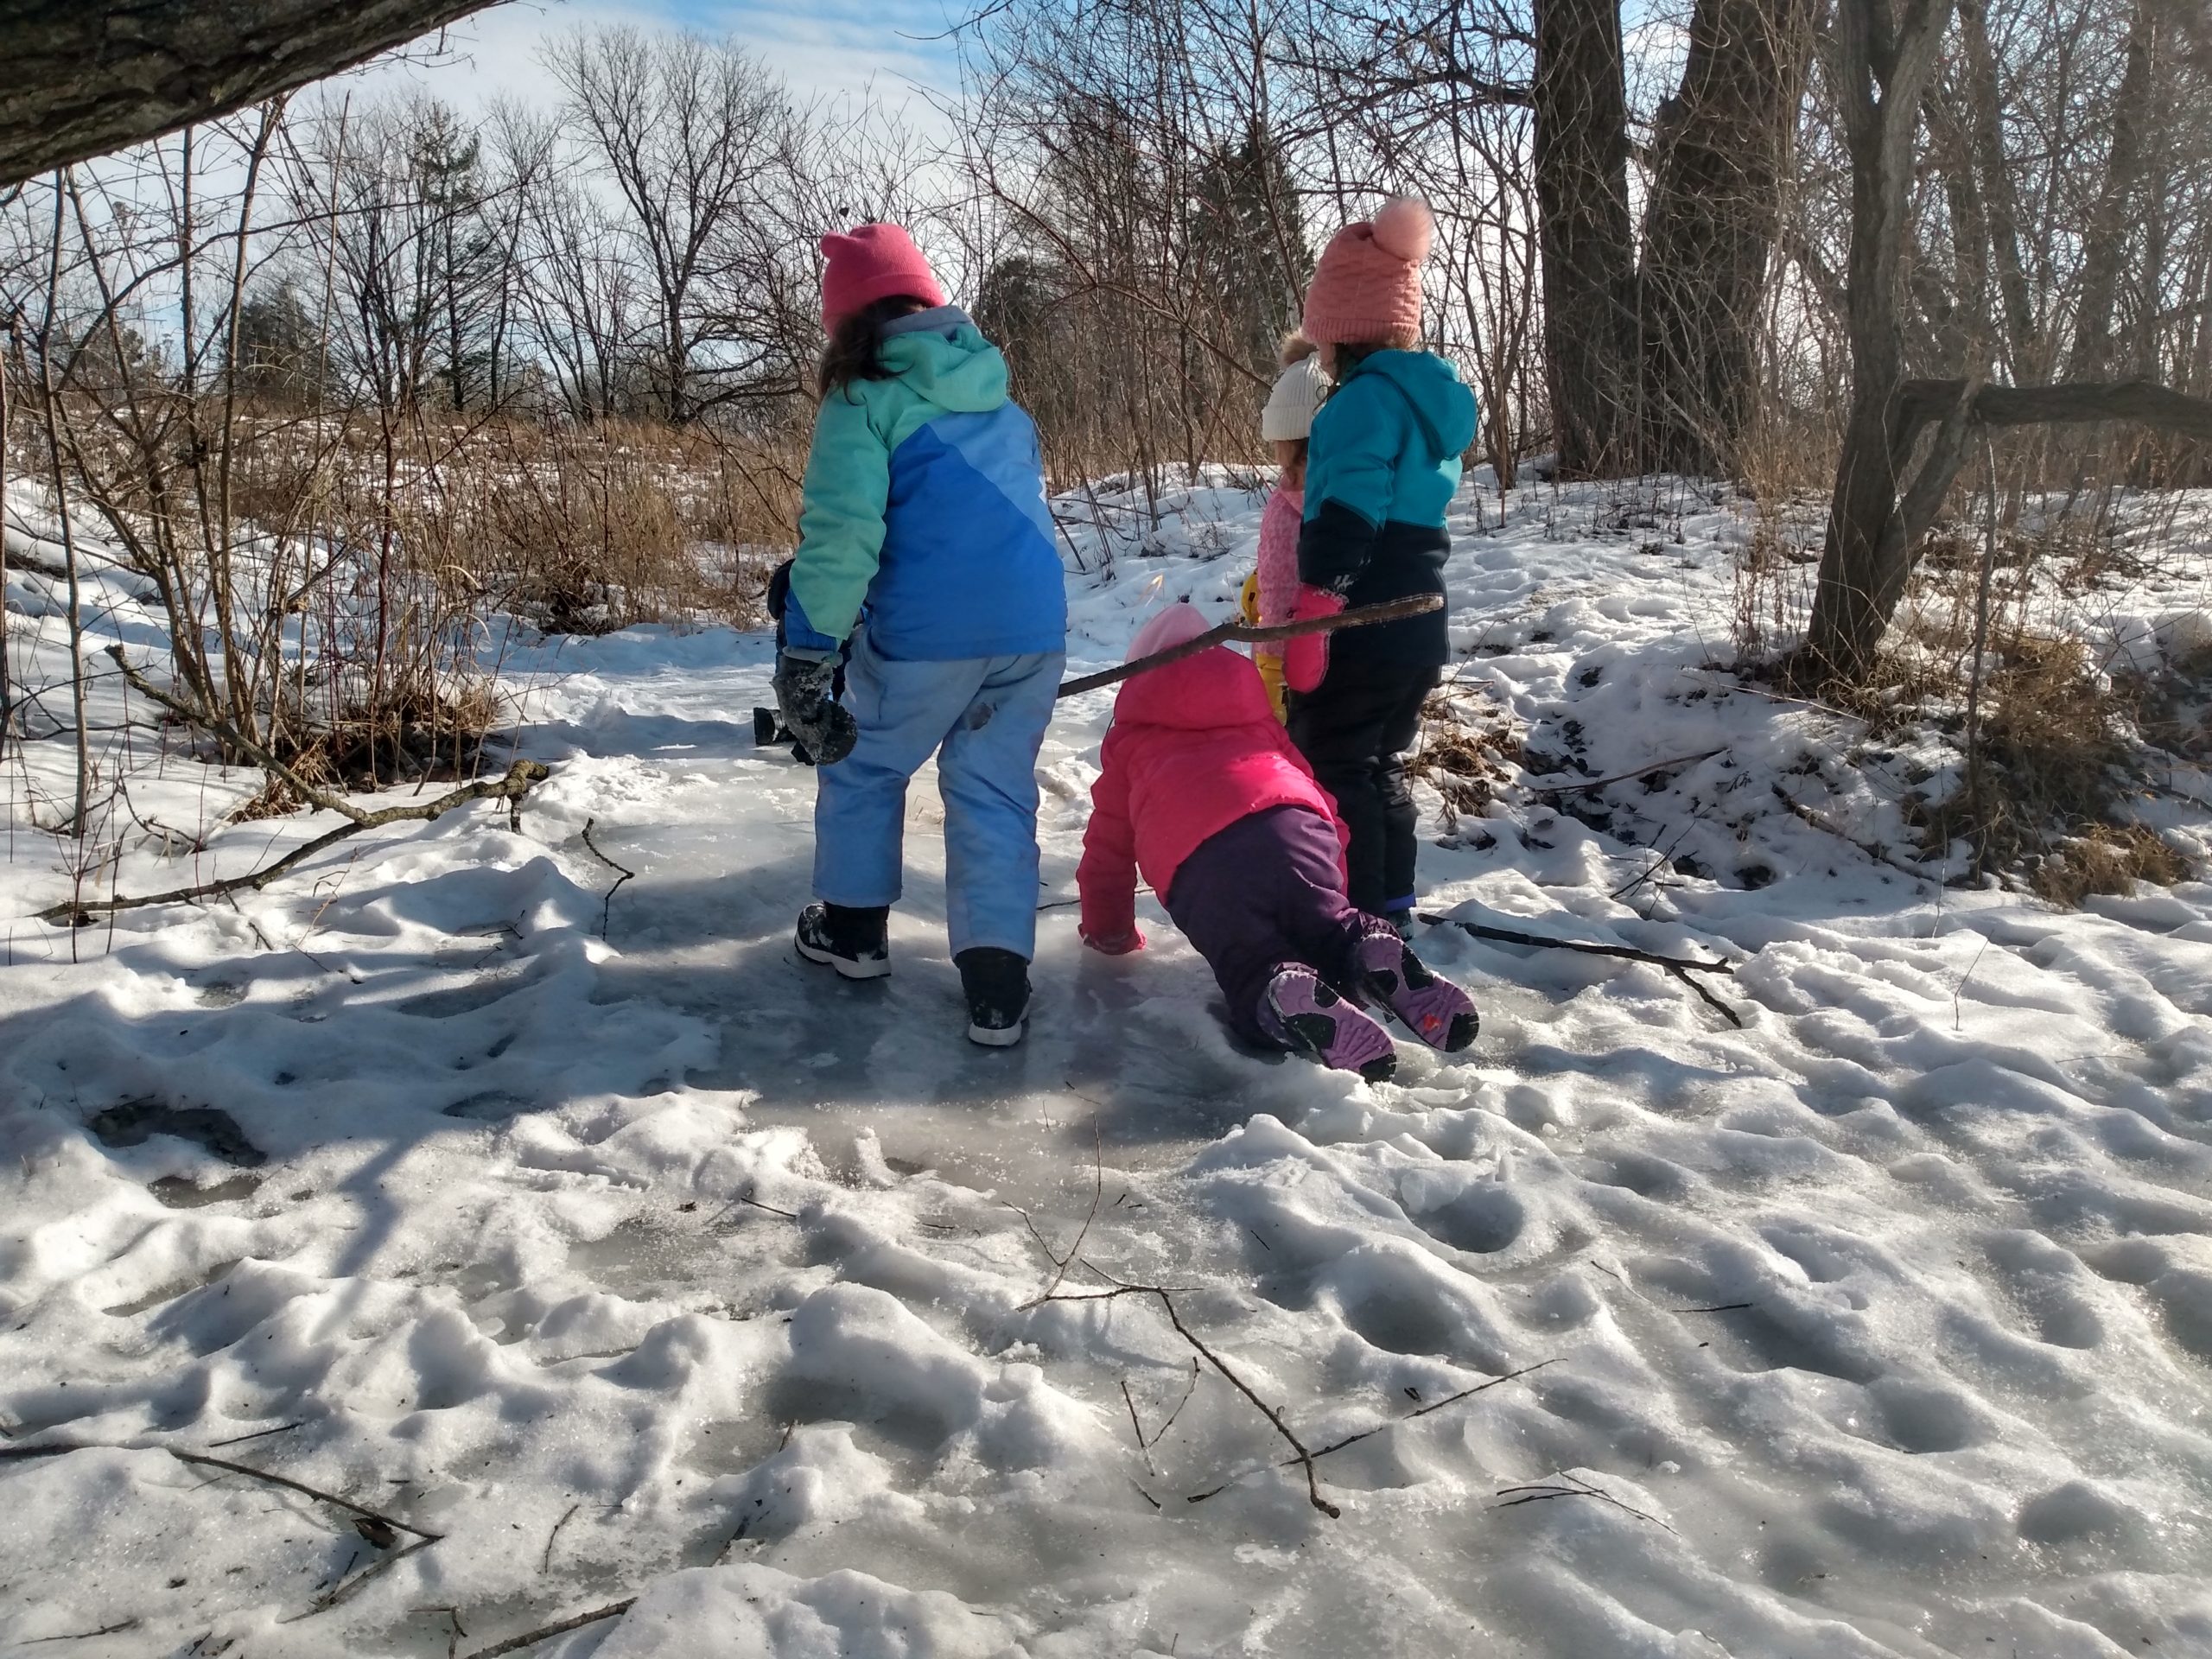 4 young kids walking and crawling on an icy path